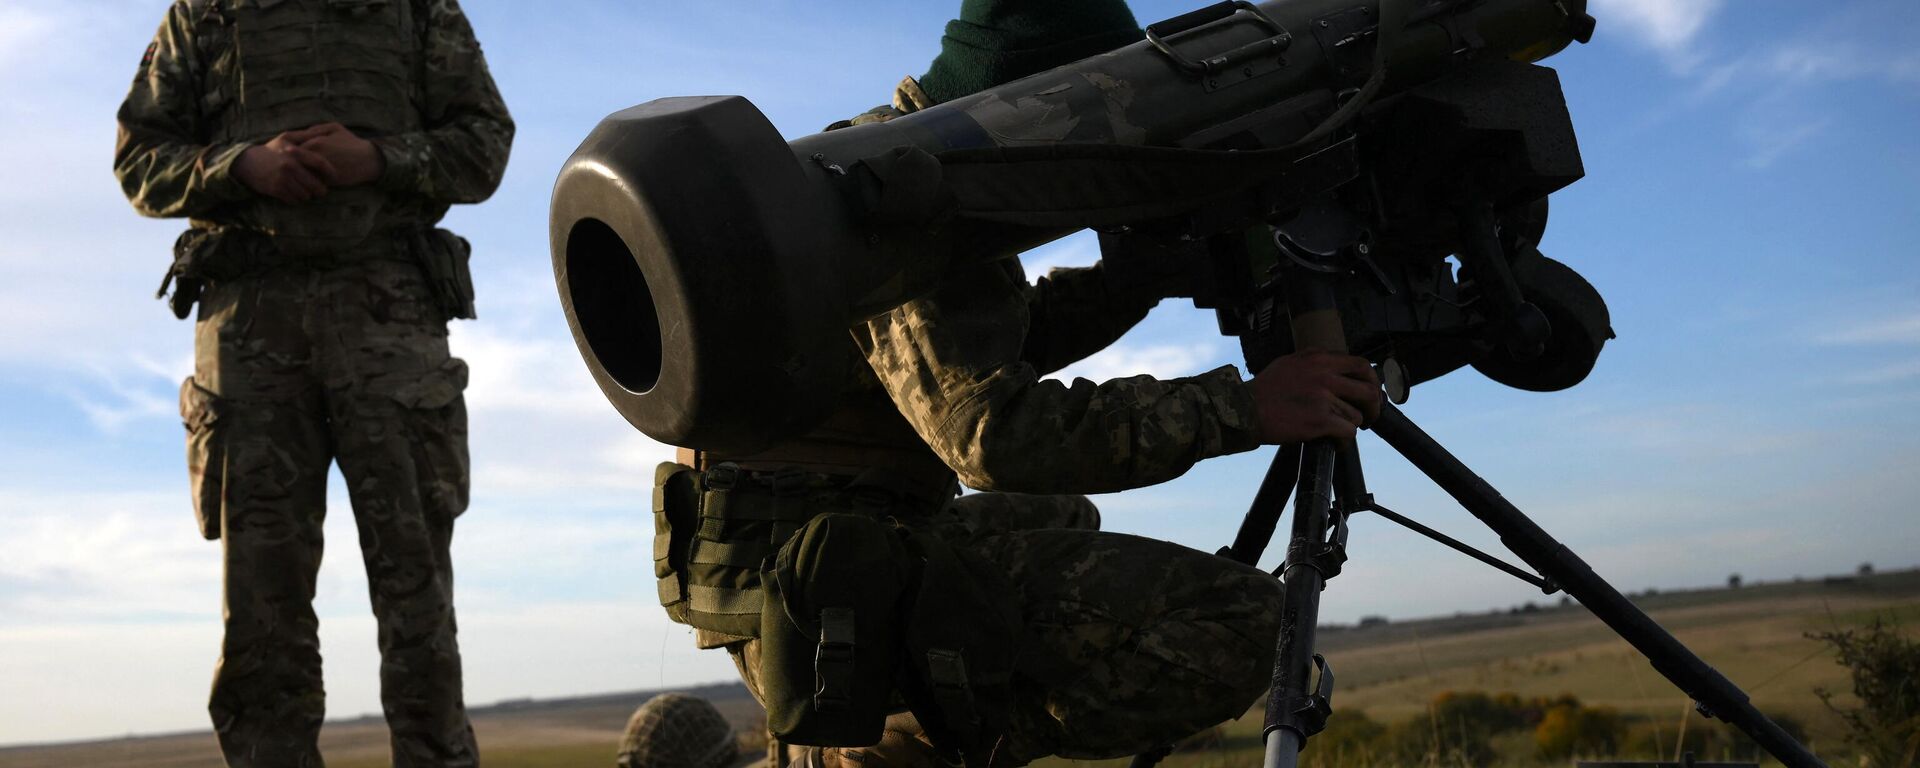 An Ukrainian recruit holds a Javelin anti-tank weapon during a five-week combat training course with the UK armed forces near Durrington in southern England on October 11, 2022 - Sputnik International, 1920, 08.02.2023